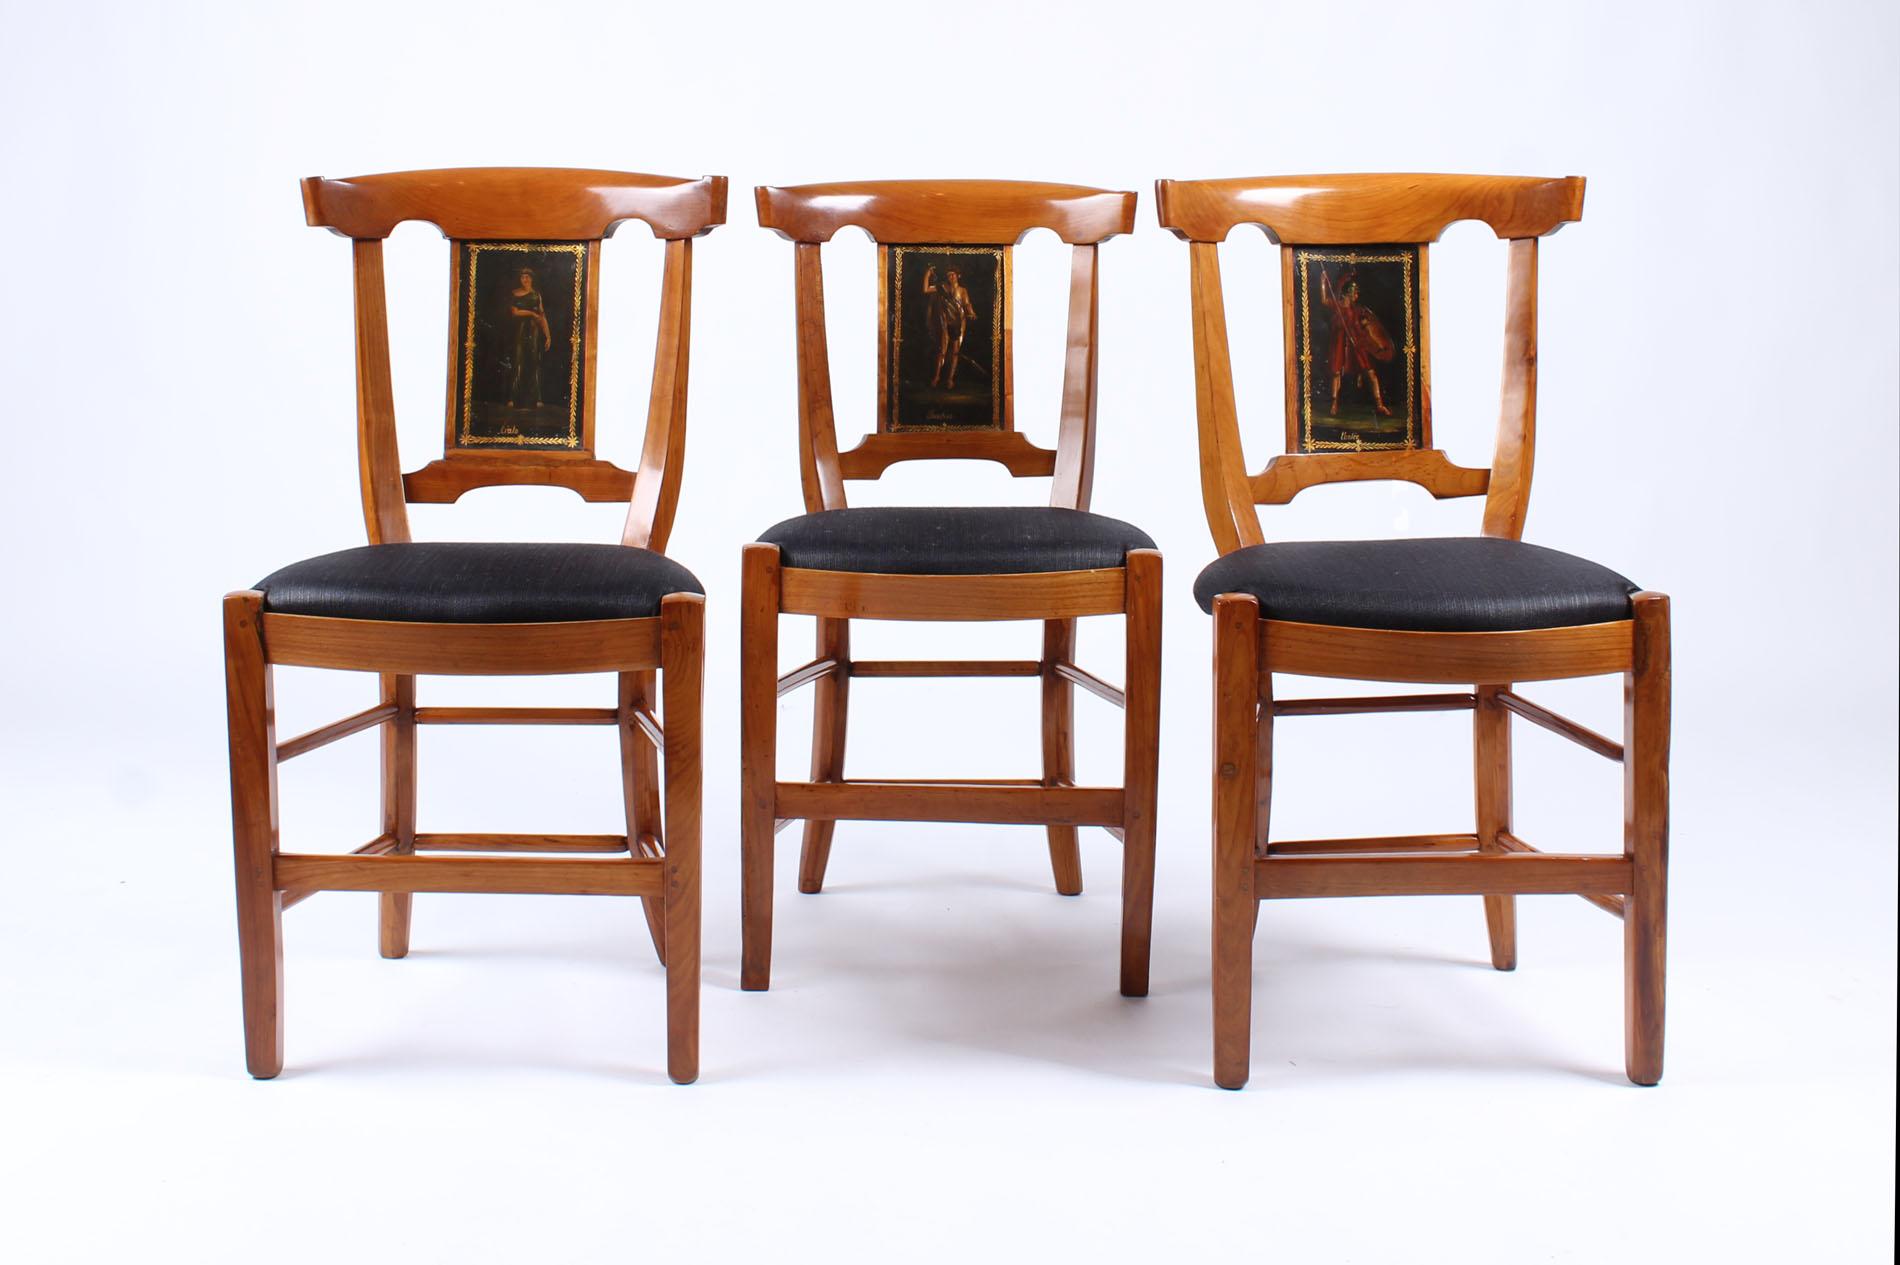 Set of Four 18th Century Chairs, France, Cherry, Painted, Directoire, circa 1800 For Sale 4